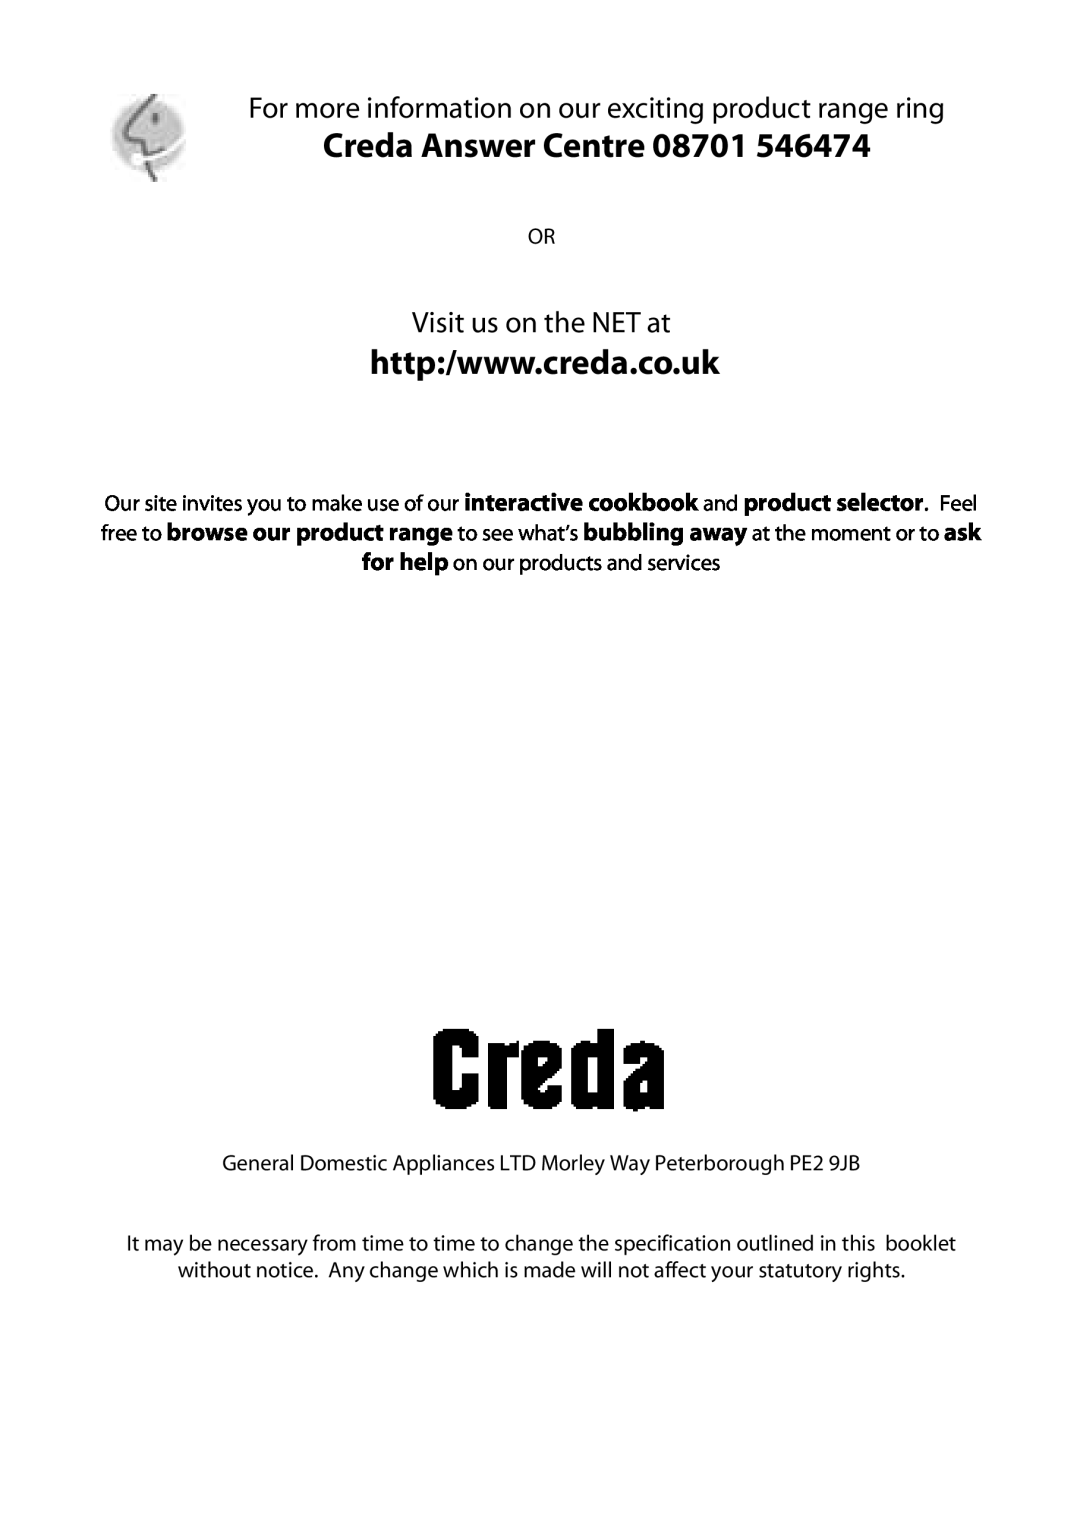 Creda X152 installation instructions Creda Answer Centre, Visit us on the NET at 